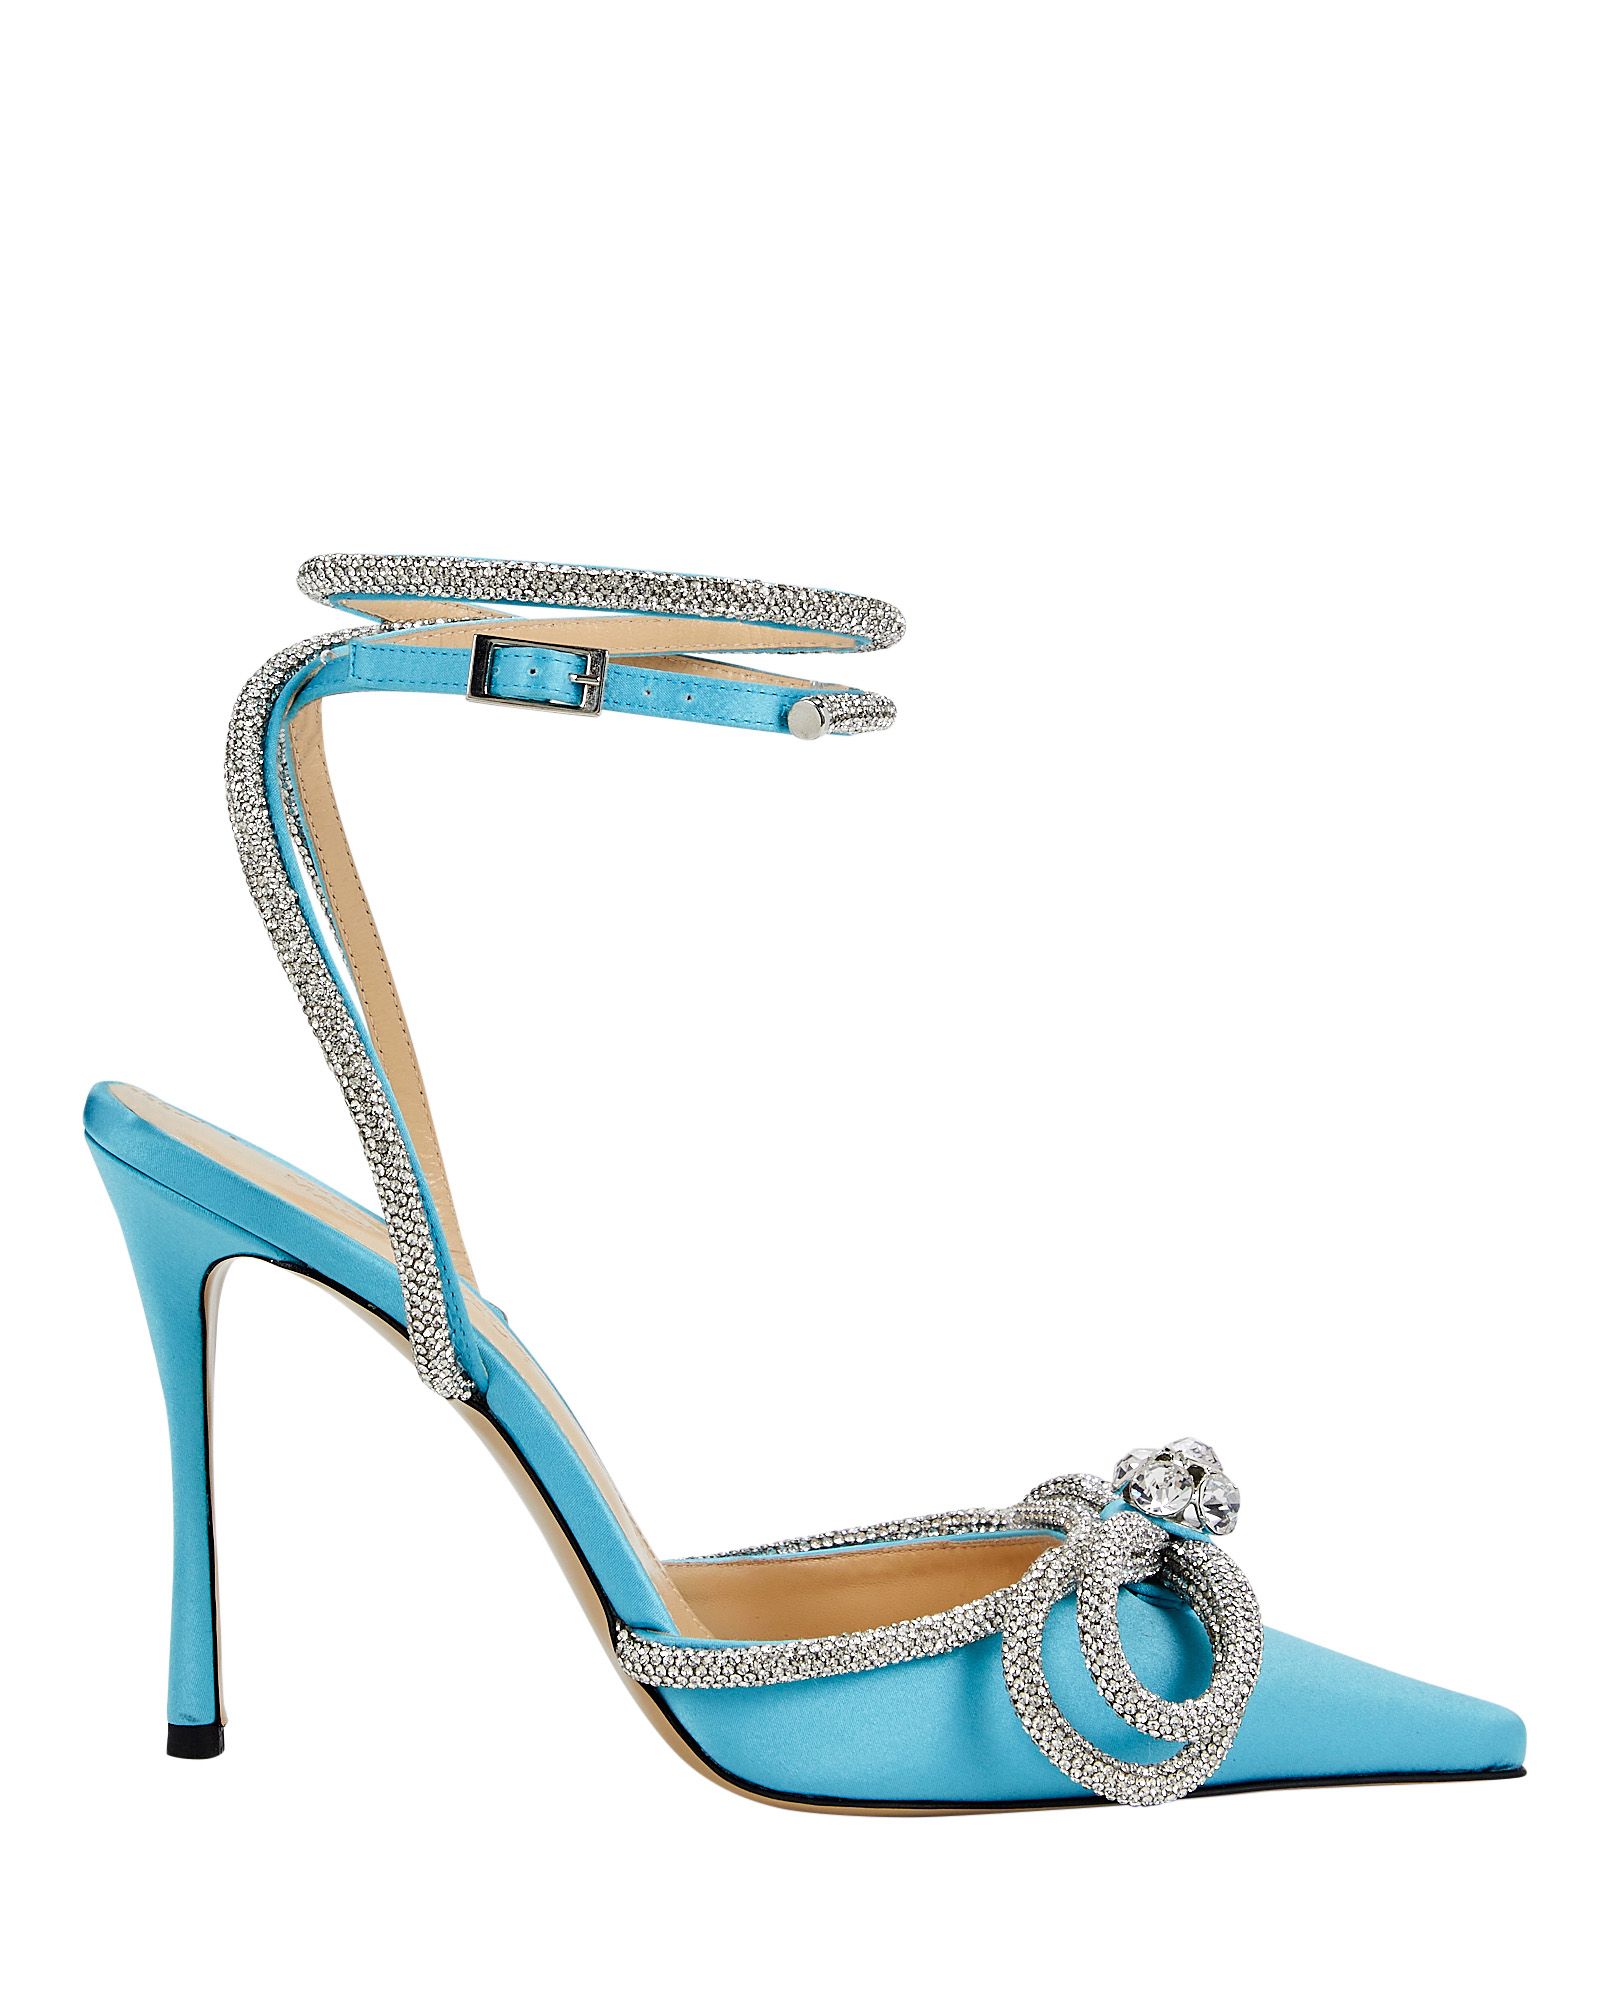 Double Bow Crystal-Embellished Satin Sandals | INTERMIX